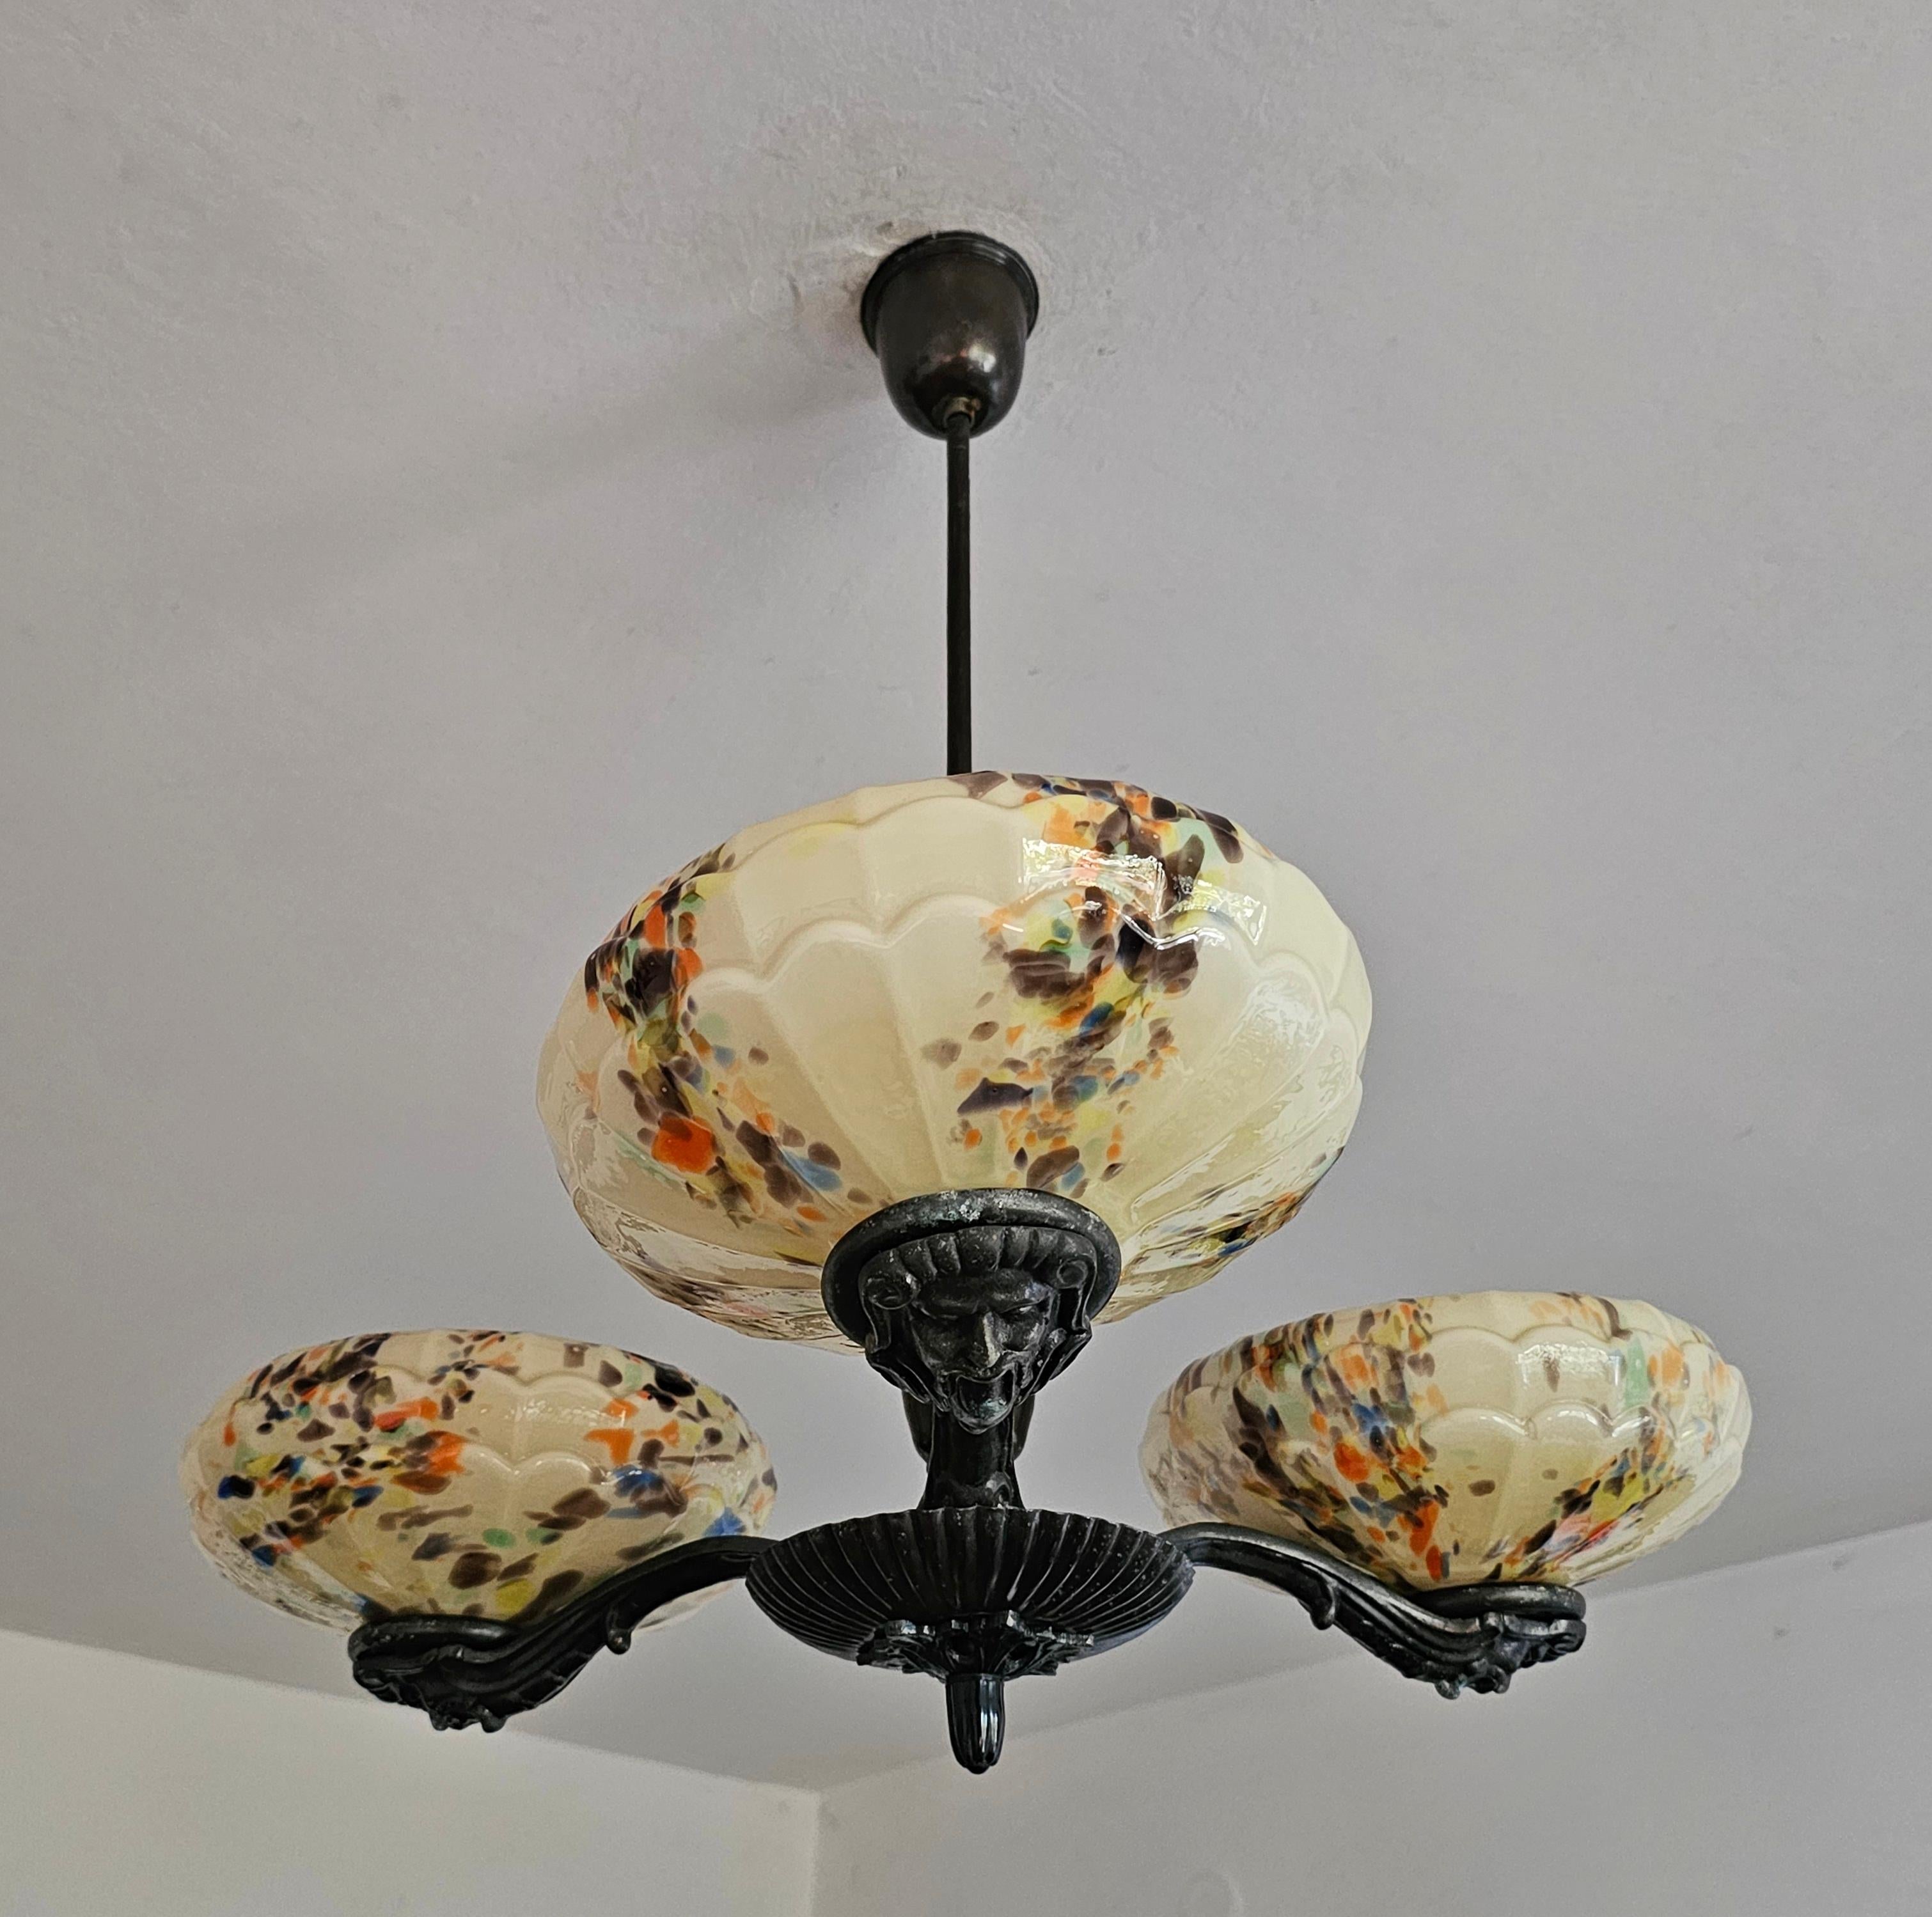 This listing features a truly spectacular chandelier, manufactured in Yugoslavia in 1930s. It belongs to Art Deco era, featuring 3 glass shades made of spotted glass in cream colour, creating a stunning composition. Each of 3 brass ends has a carved